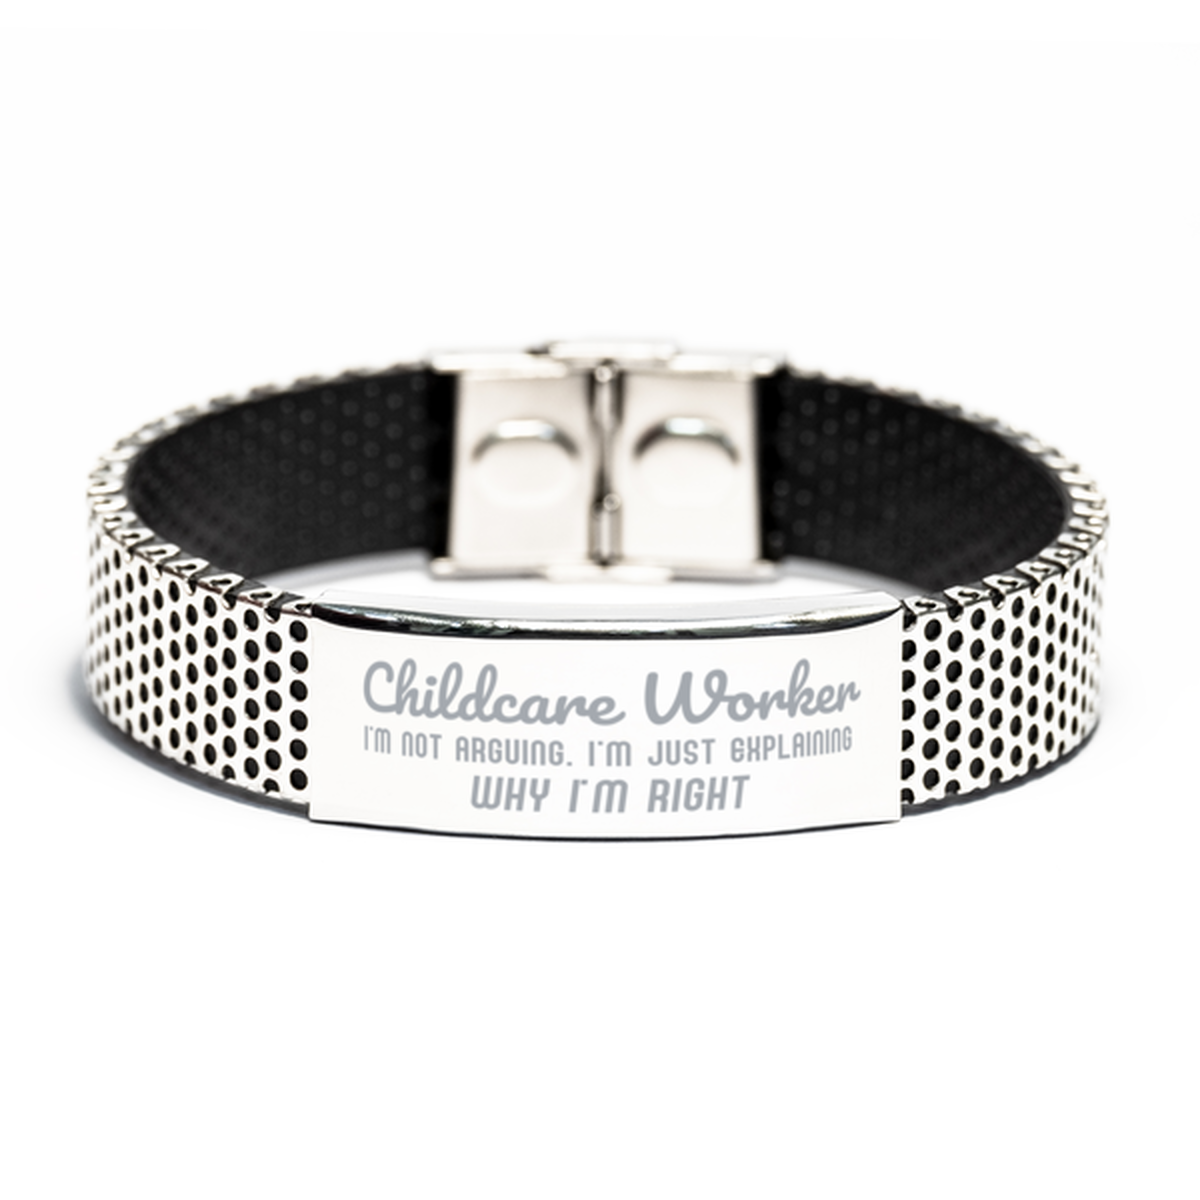 Childcare Worker I'm not Arguing. I'm Just Explaining Why I'm RIGHT Stainless Steel Bracelet, Funny Saying Quote Childcare Worker Gifts For Childcare Worker Graduation Birthday Christmas Gifts for Men Women Coworker